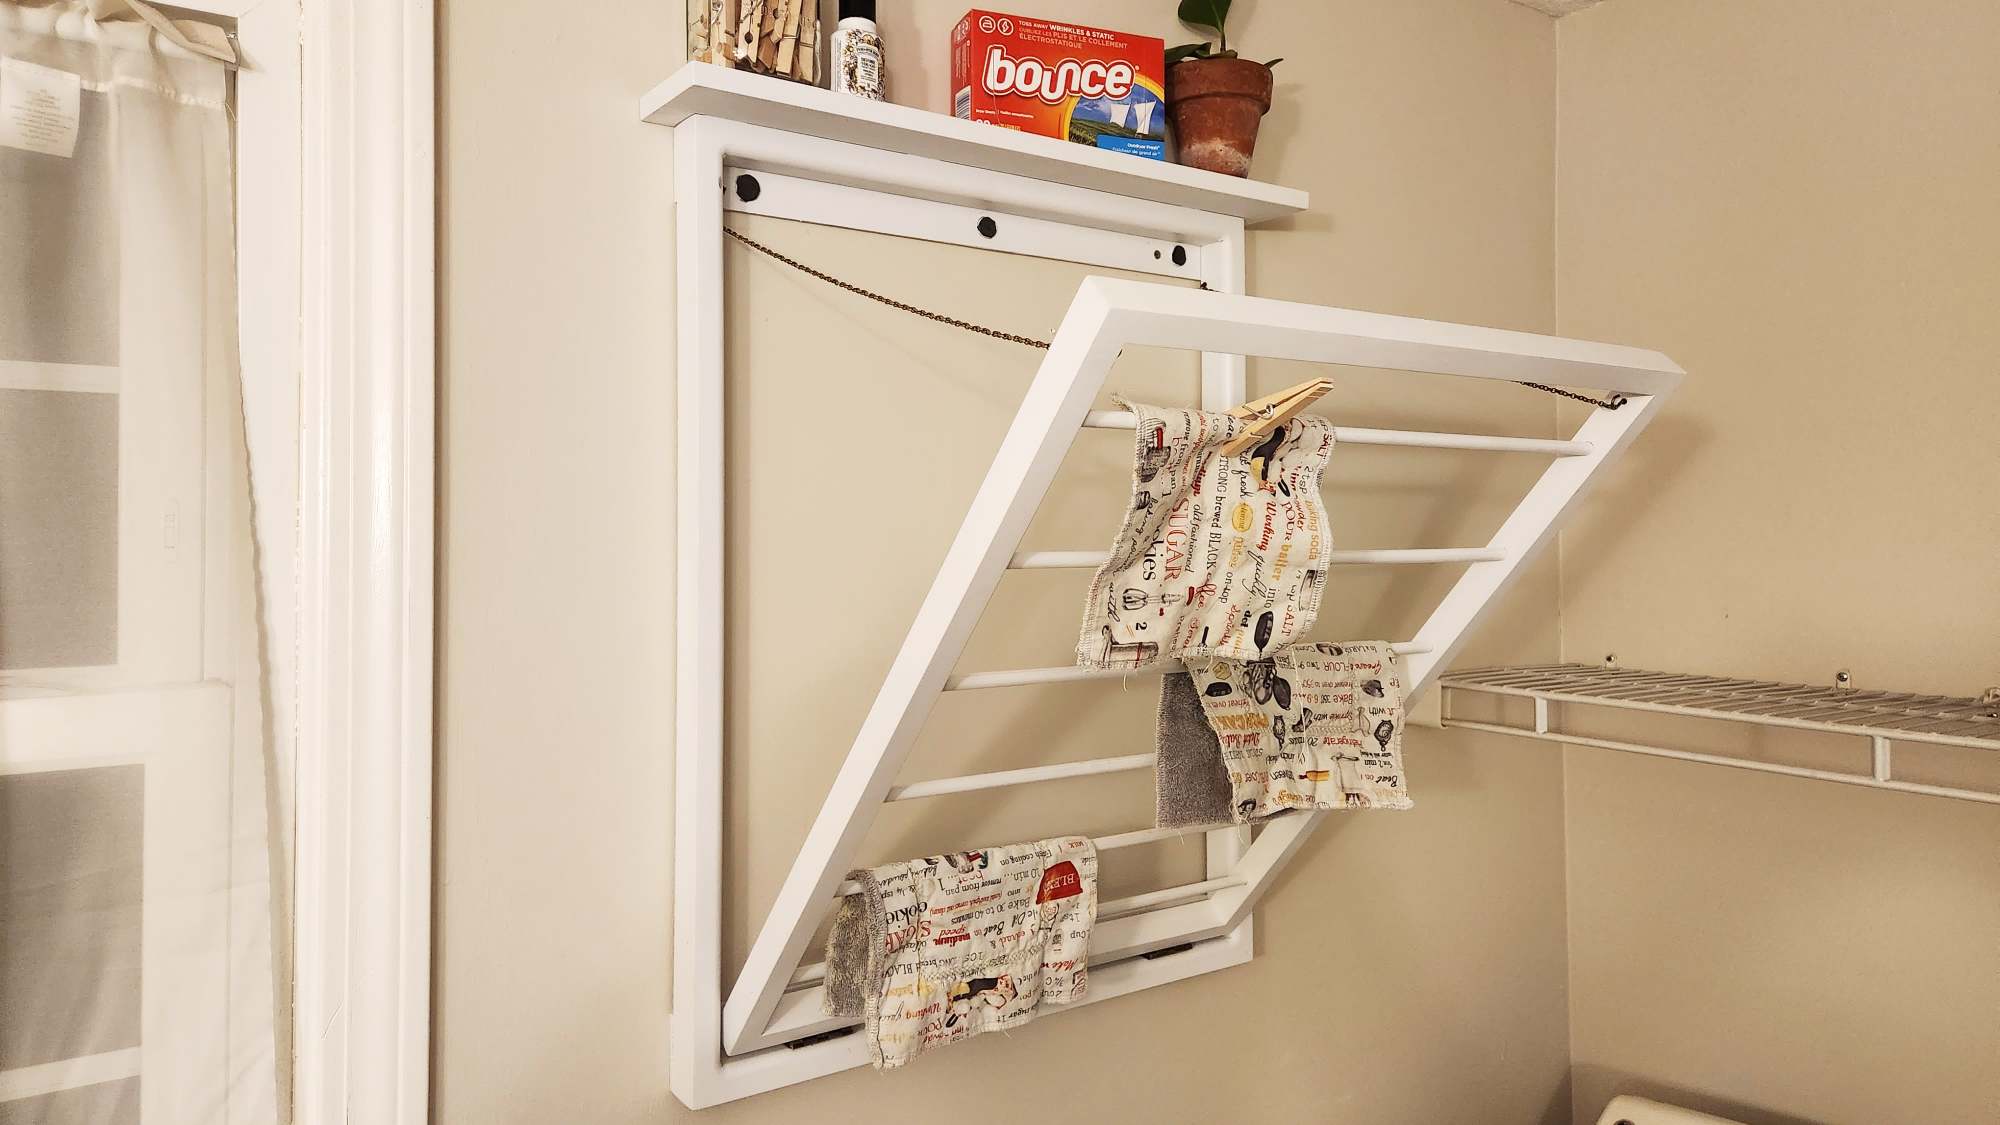 Dry Away Eco-Friendly Laundry Drying Racks for Your Laundry Room